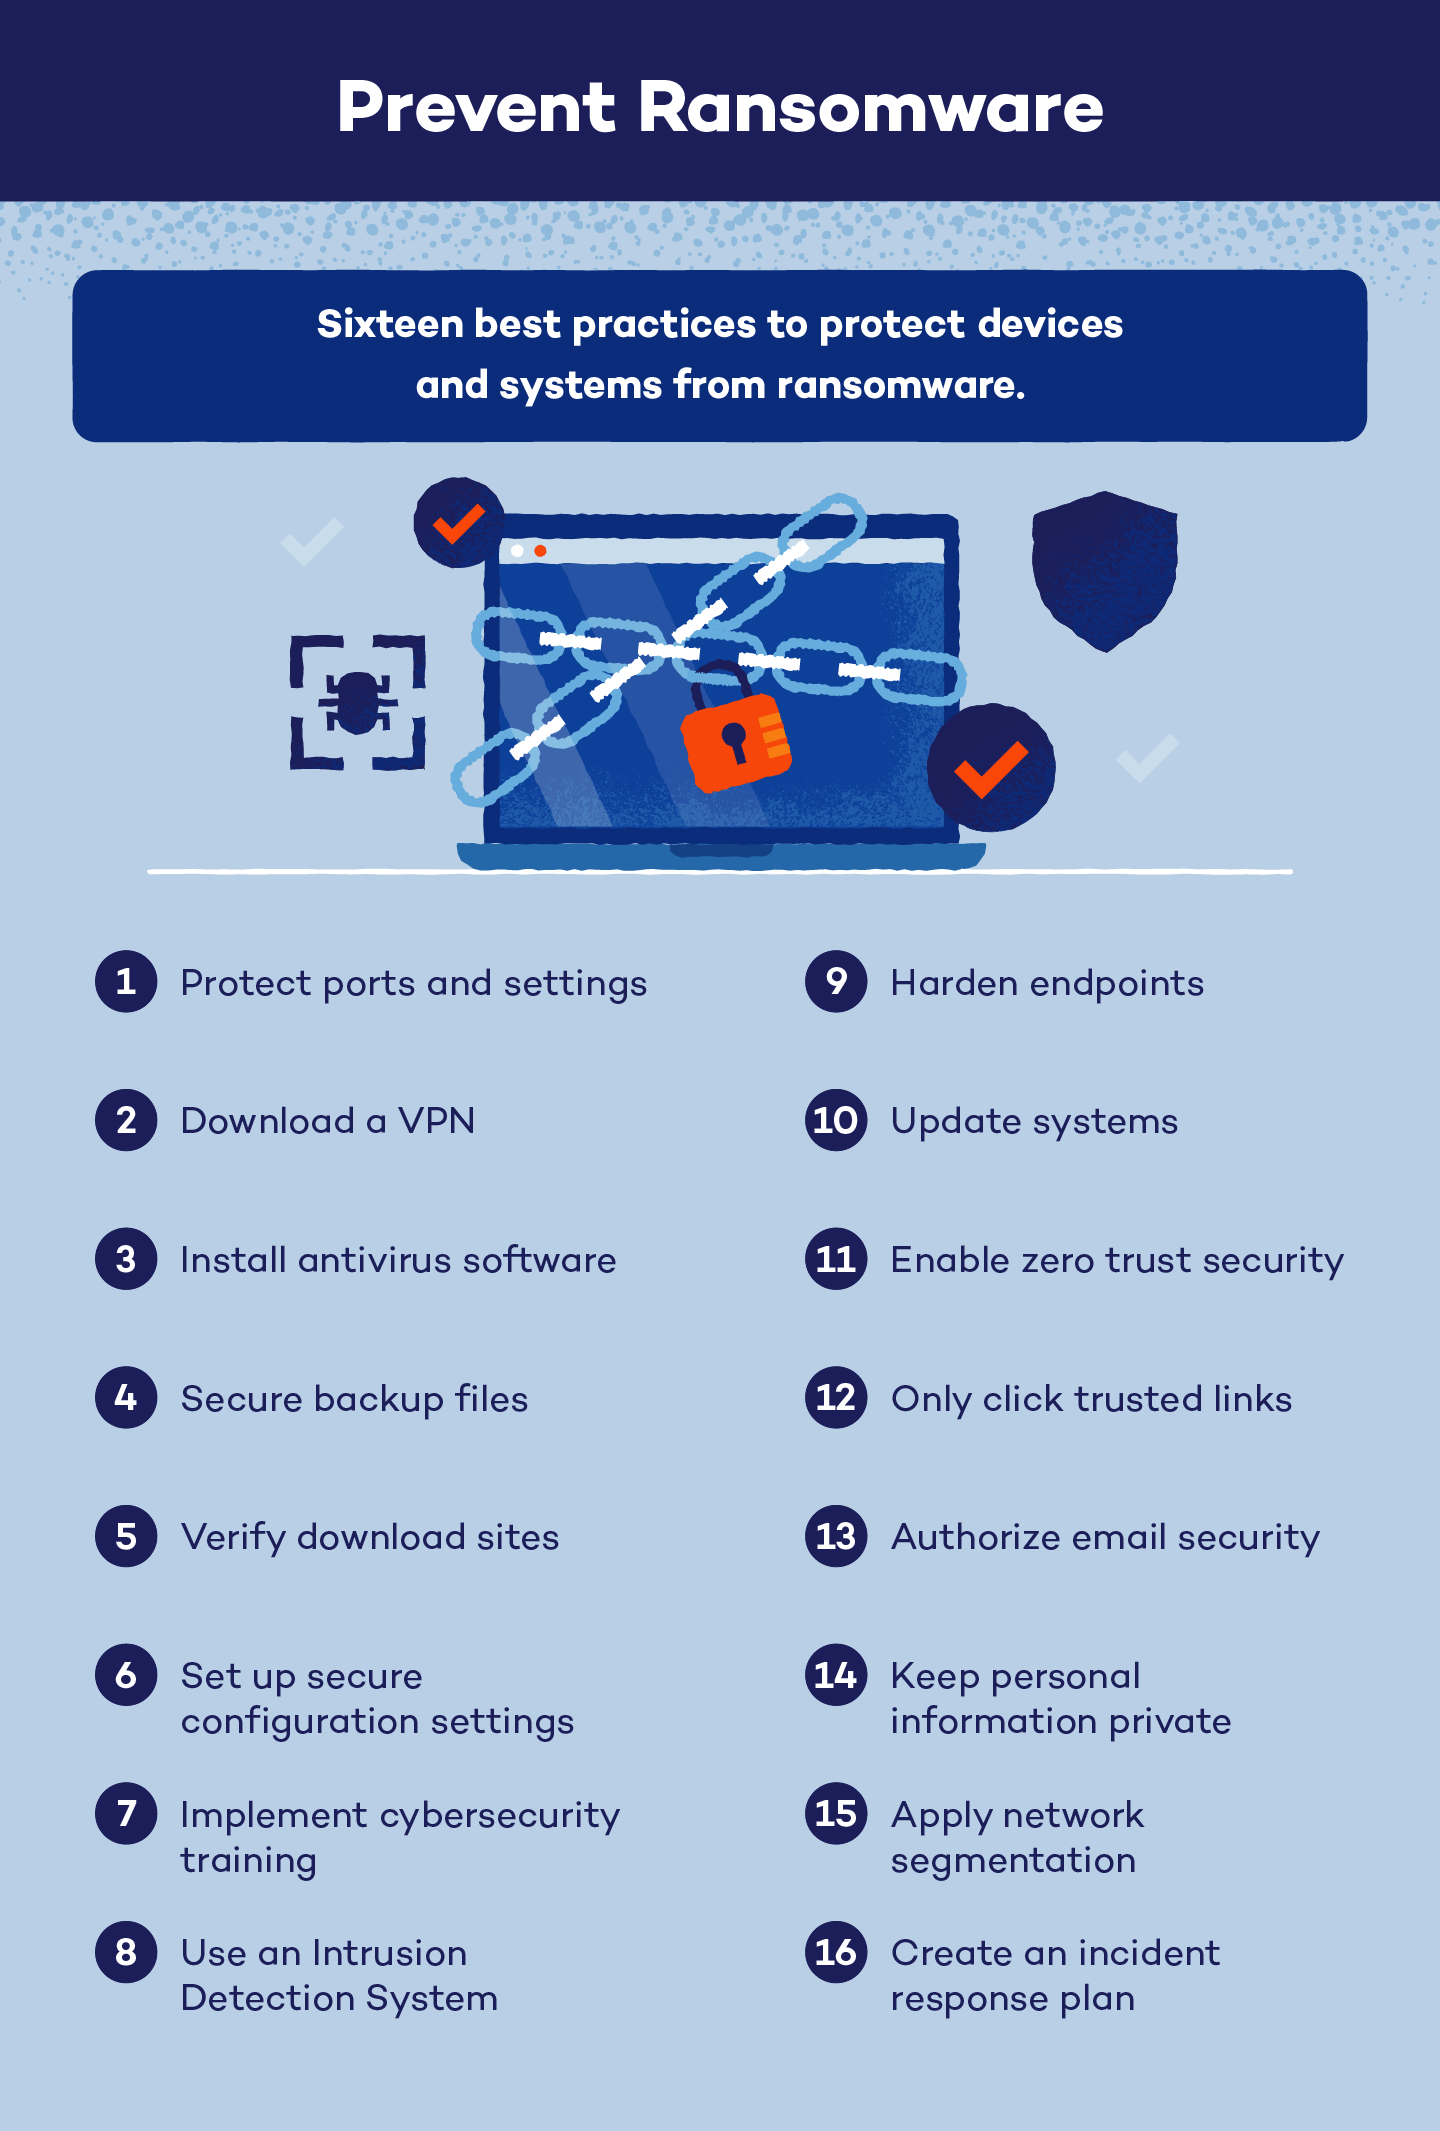 Blue laptop surrounded by chains and a red lock representing 16 best practices to prevent ransomware.